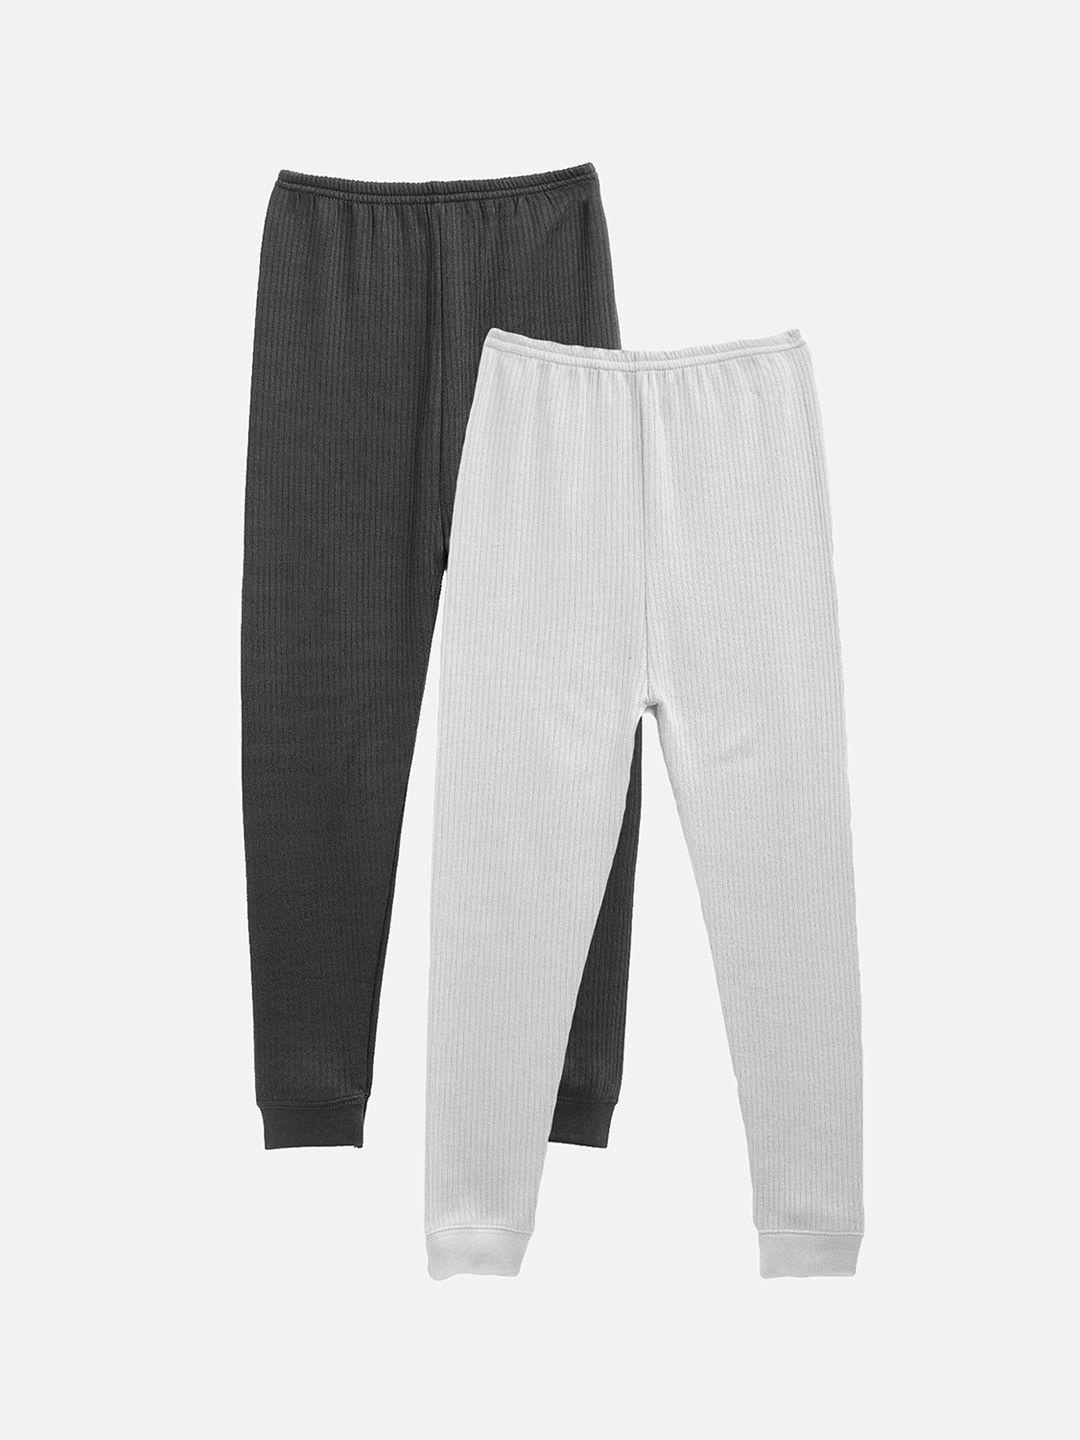 kanvin boys pack of 2 solid thermal bottoms